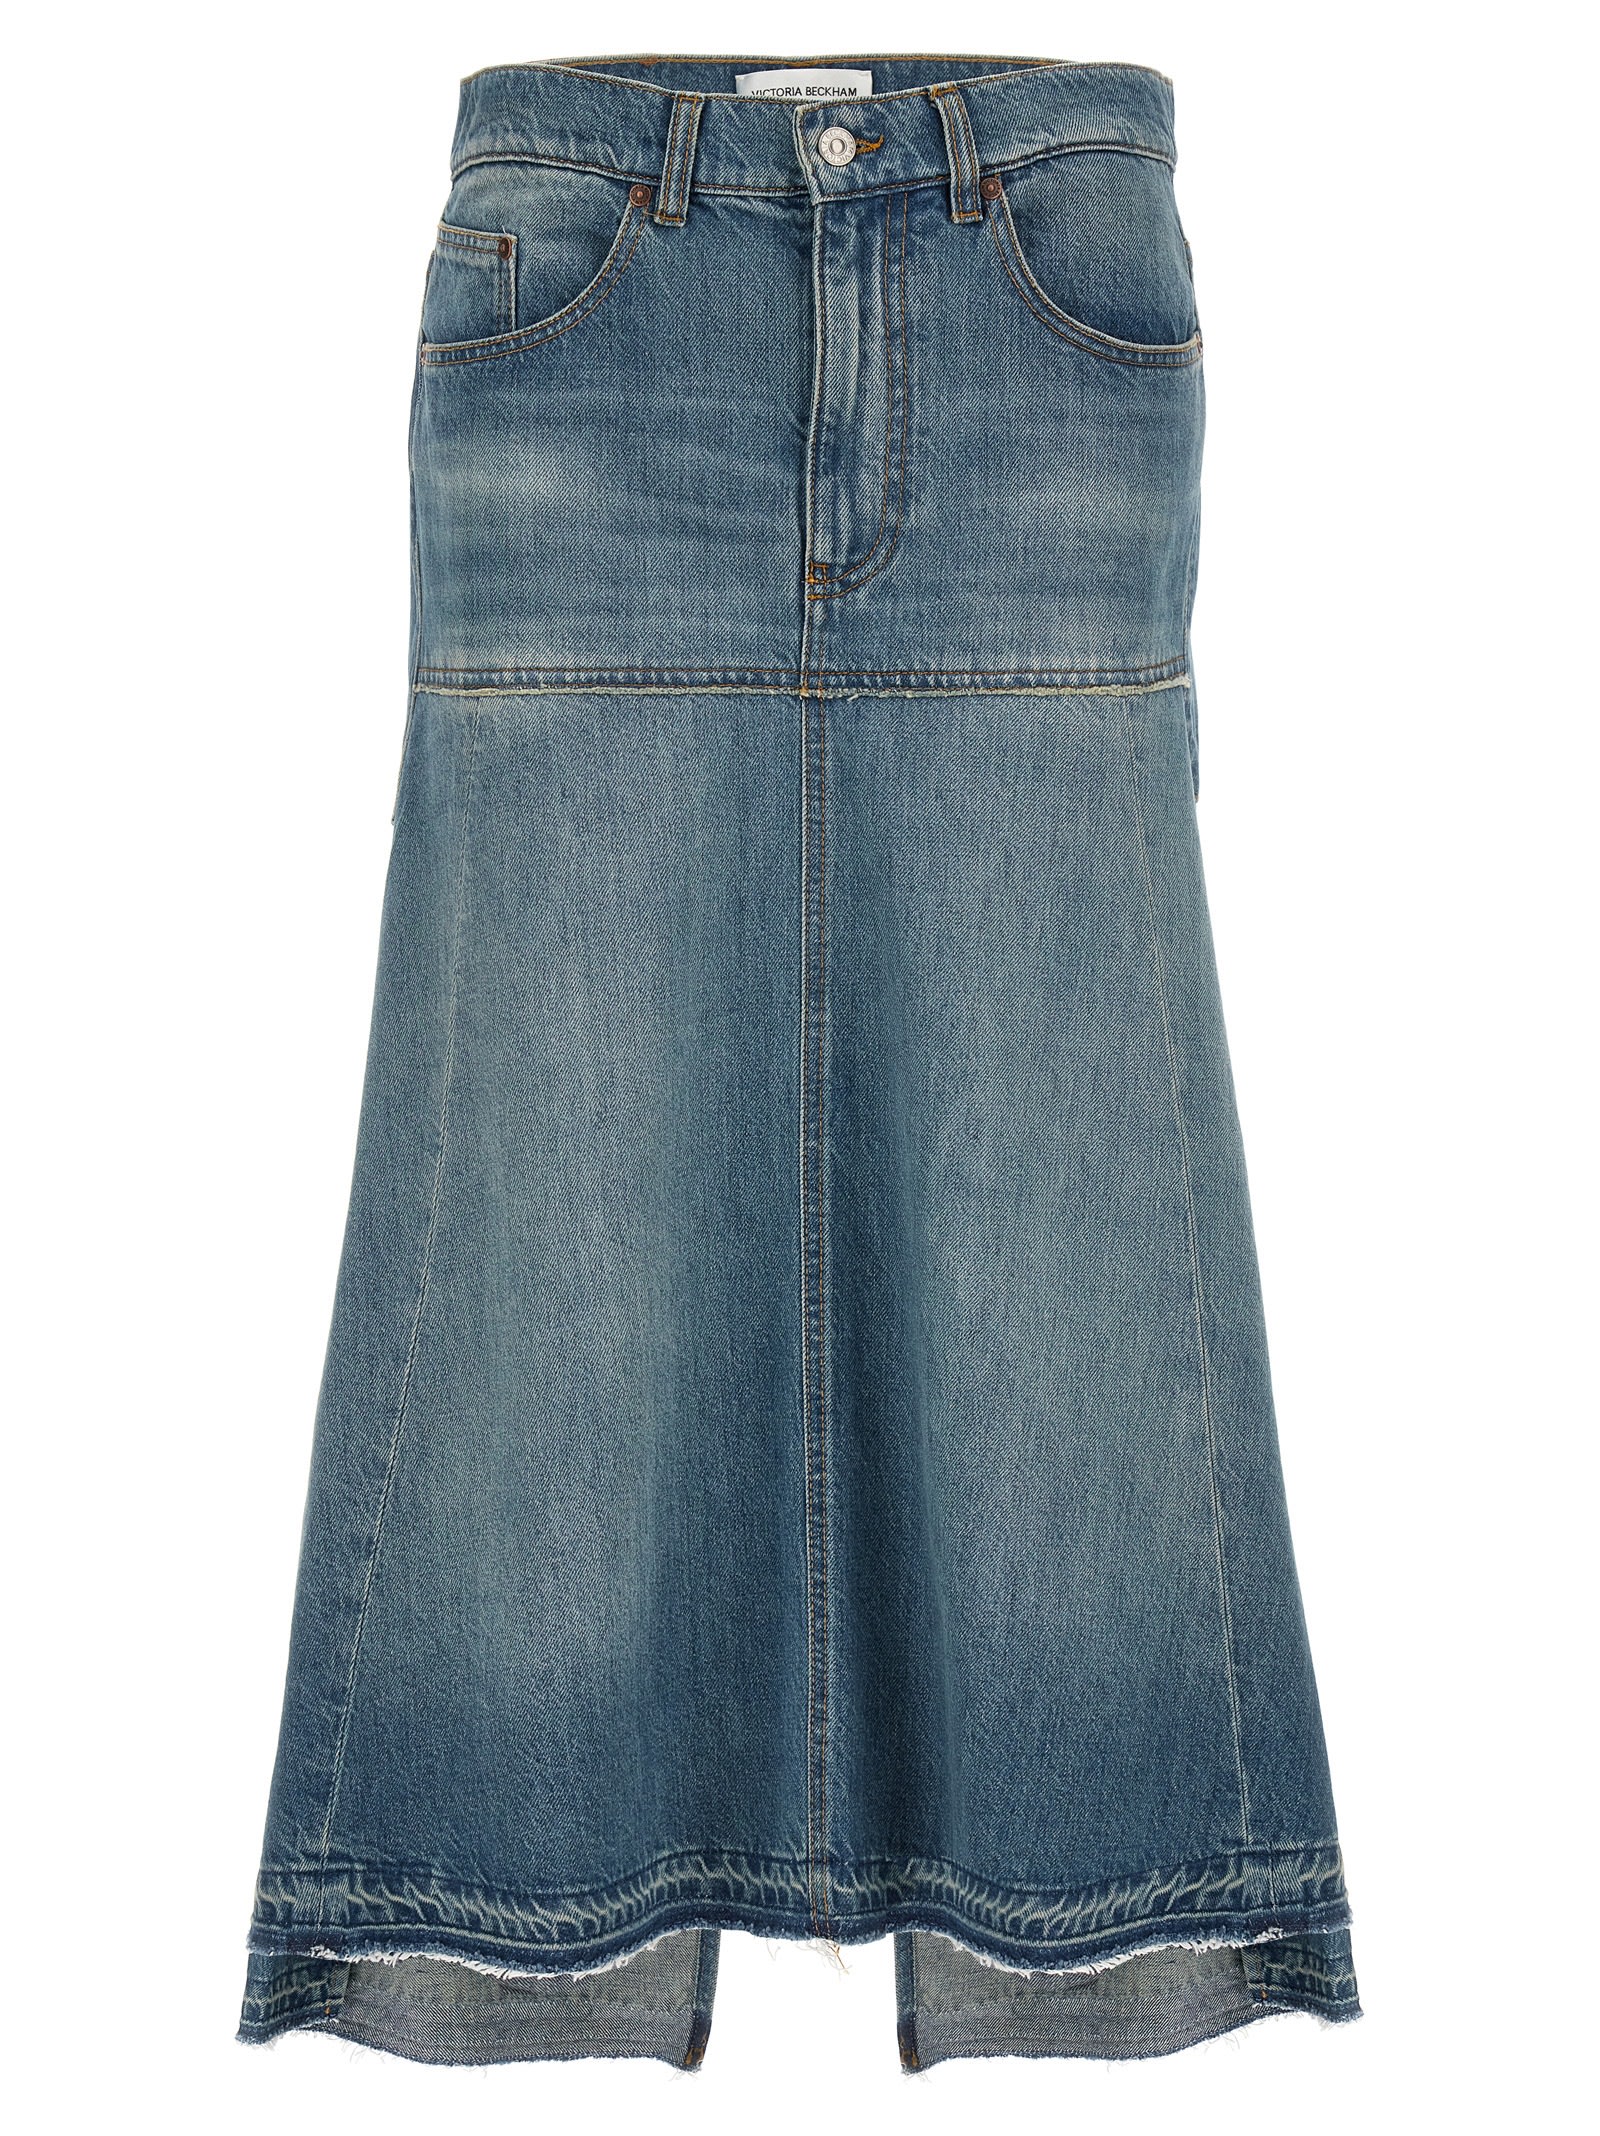 fit & Flare Patched Denim Skirt